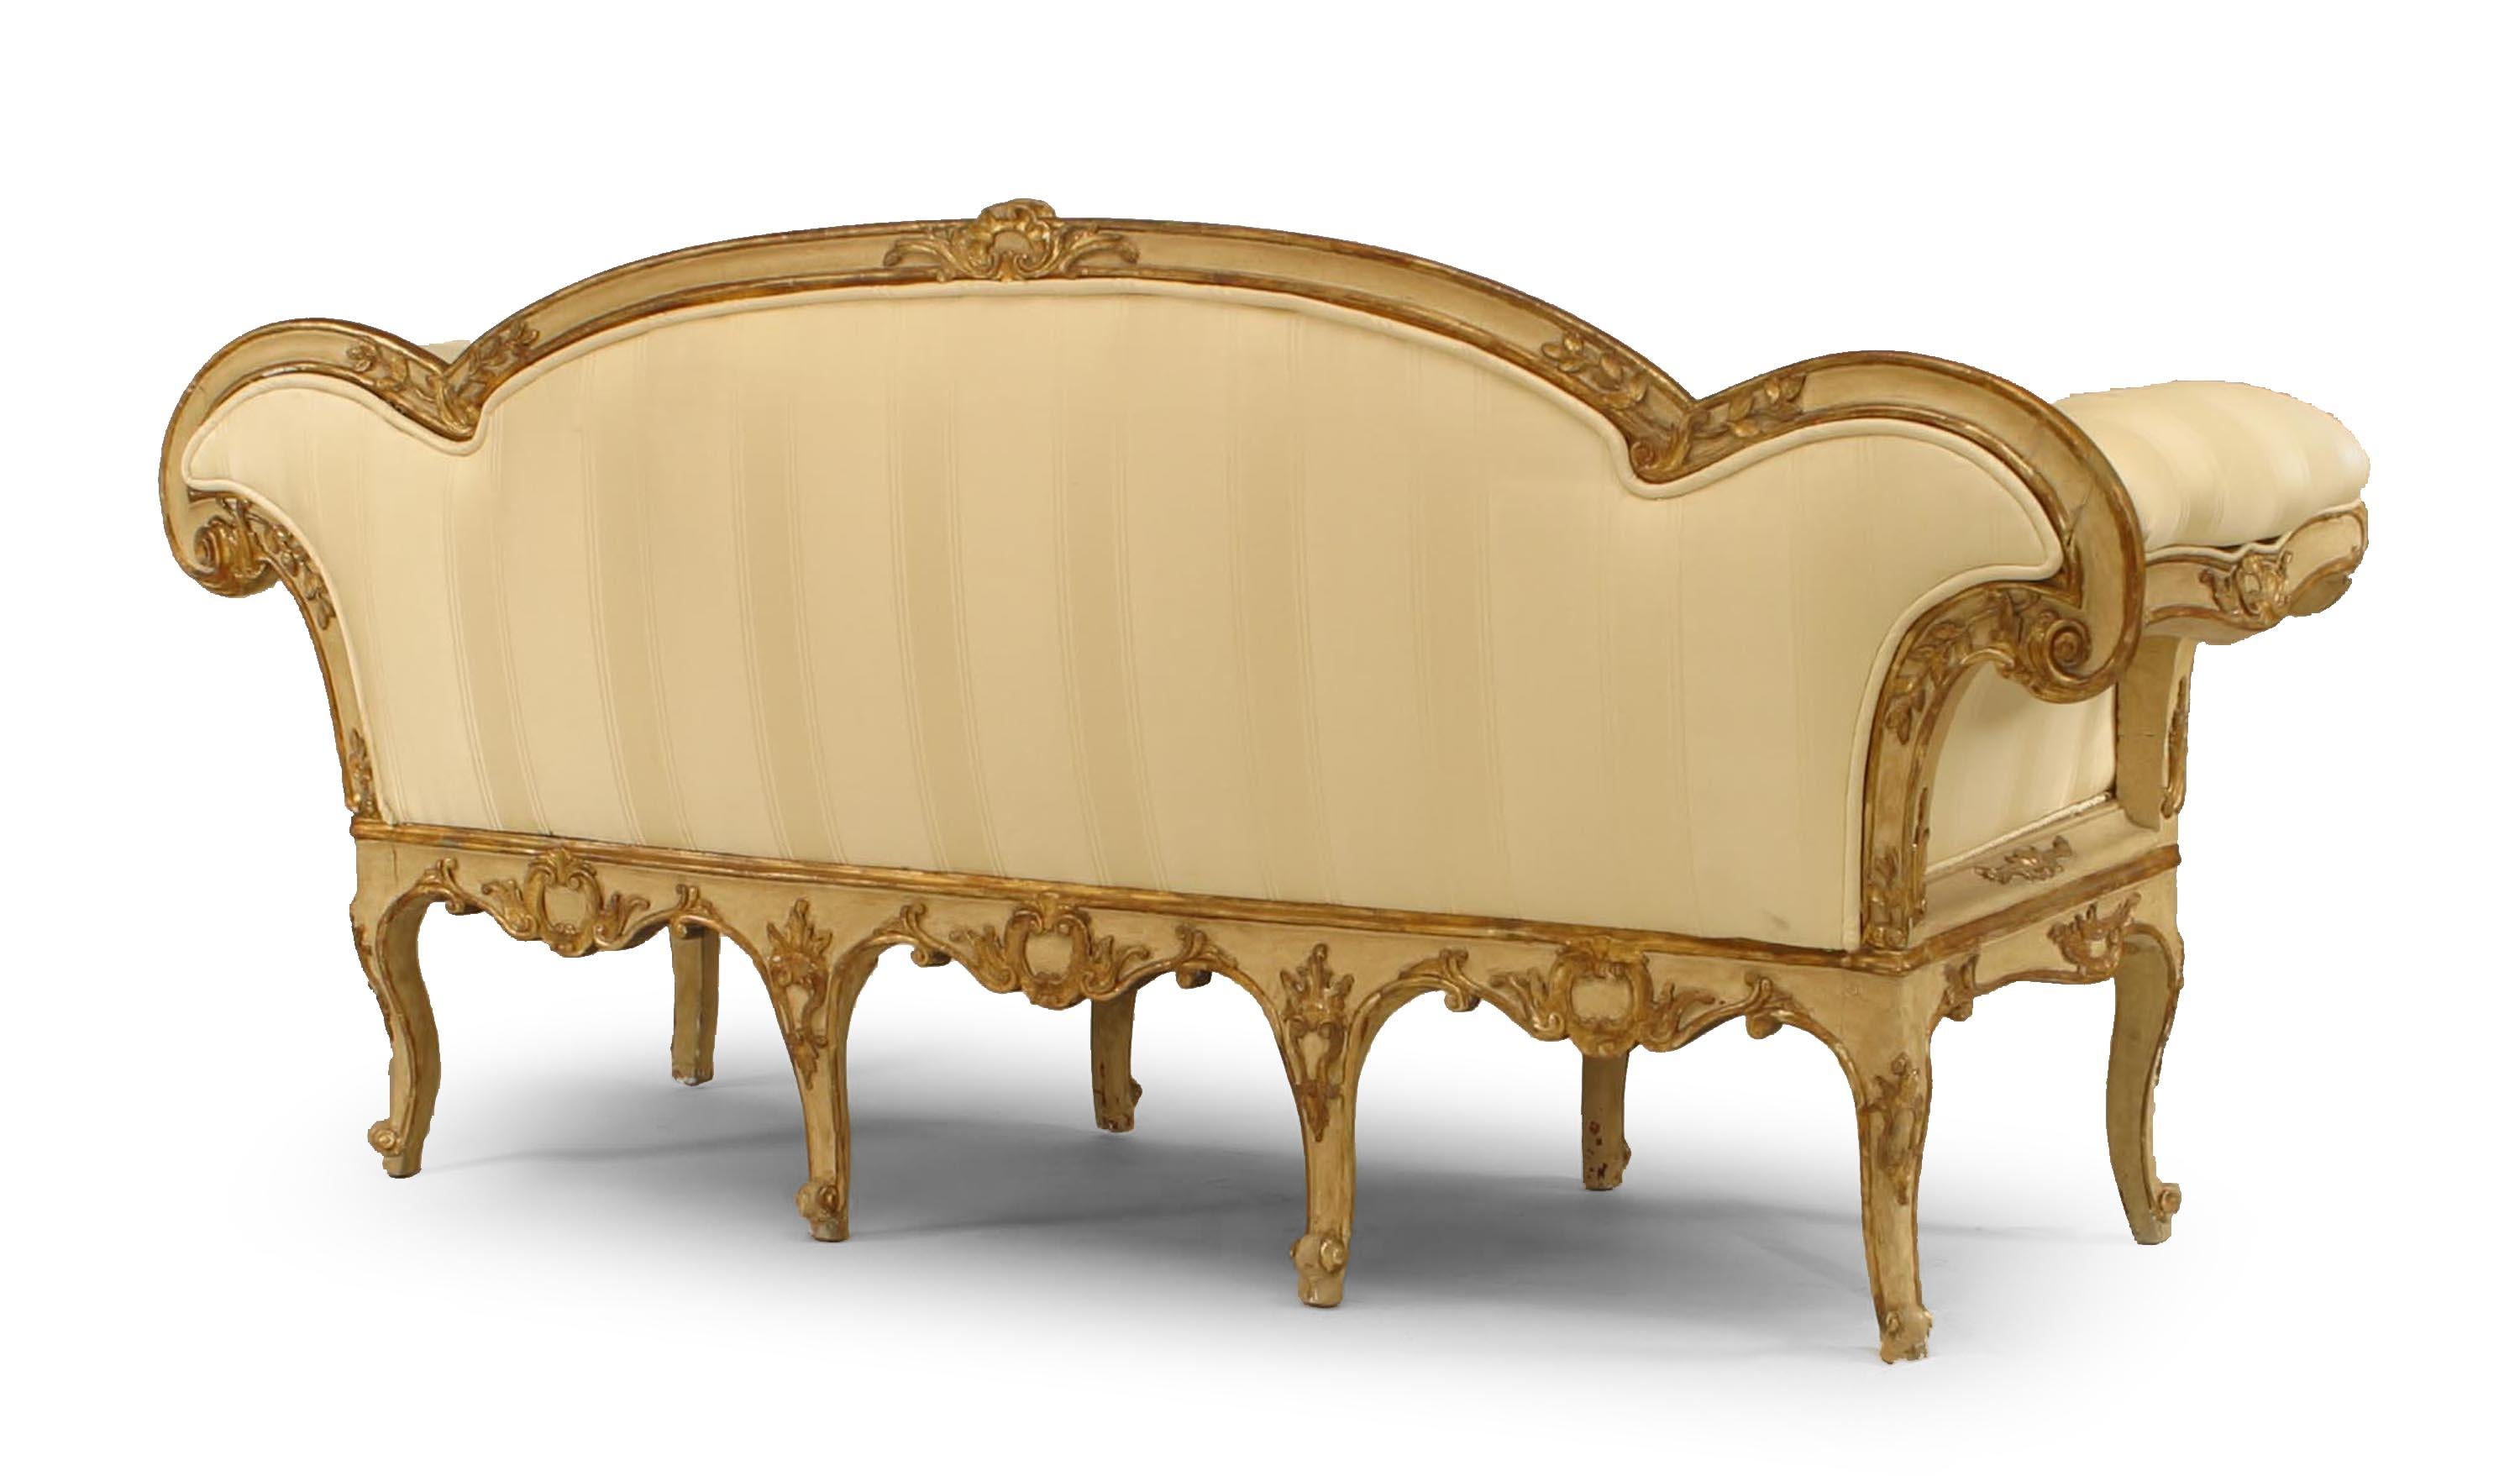 Italian Venetian (18th century) cream painted and gilt trimmed carved floral design settee with roll arms and carving on back (restorations to interior frame).